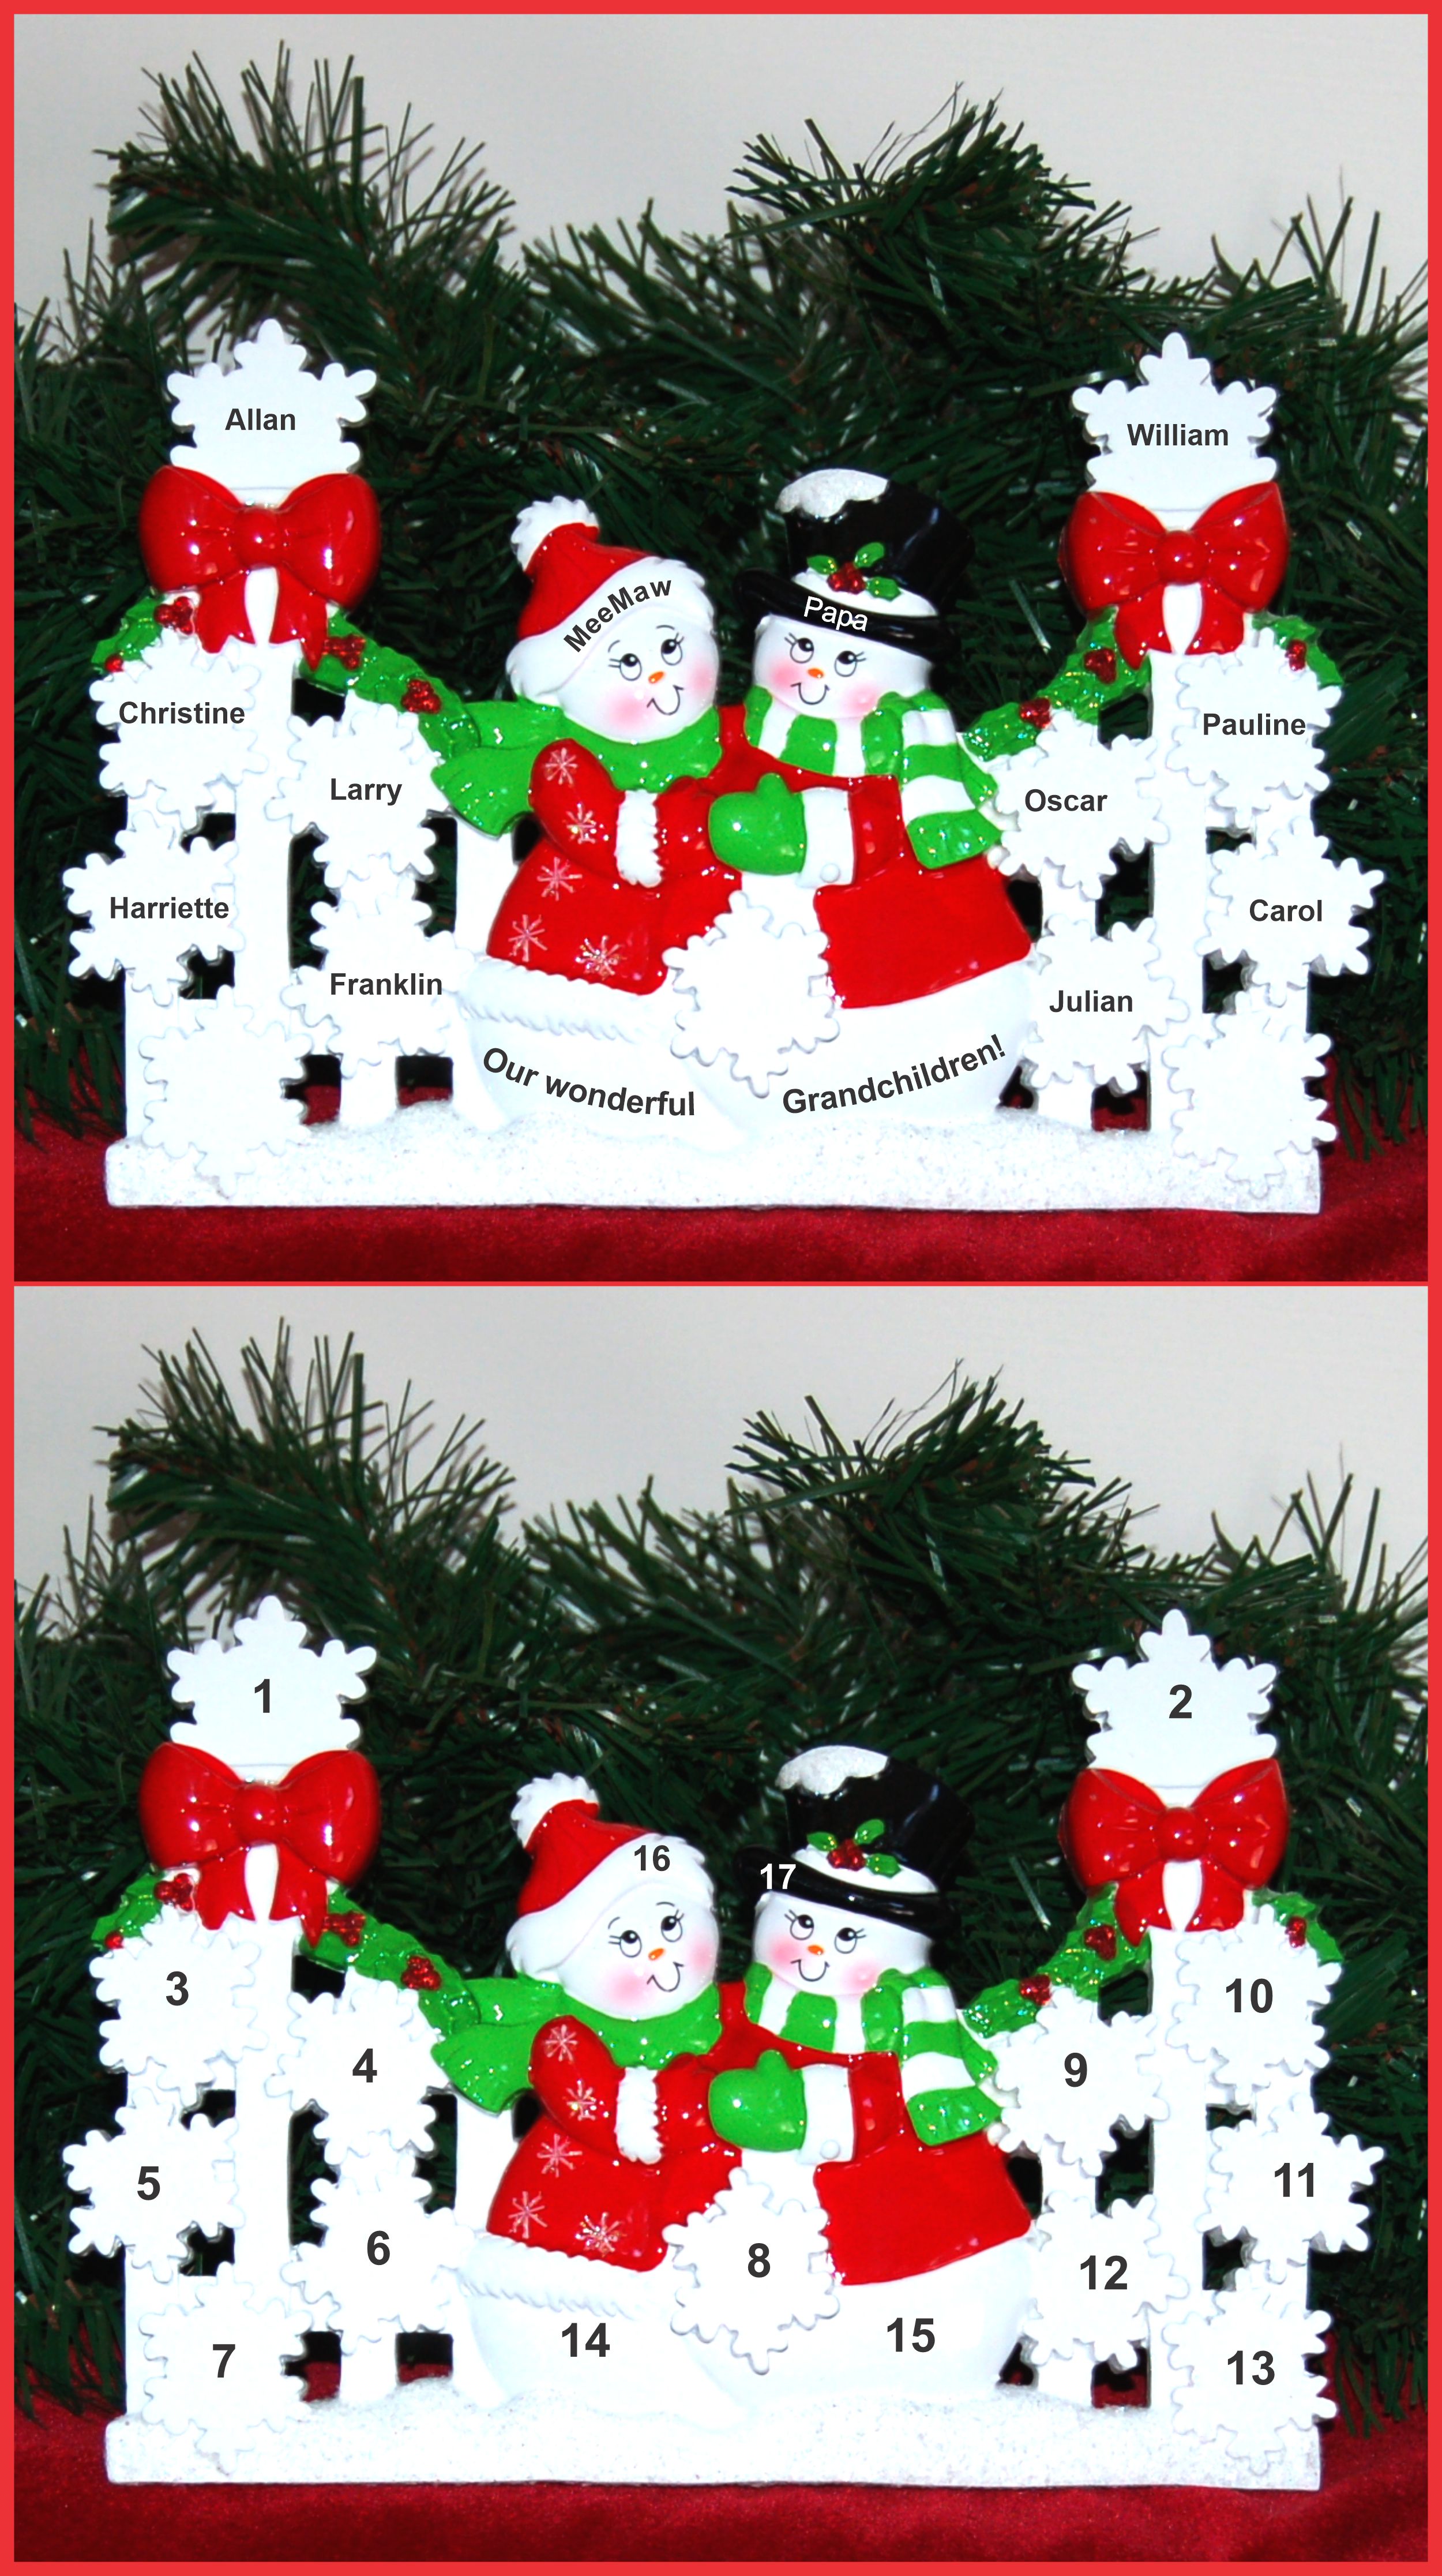 Tabletop Christmas Decoration Snowflakes for 10 Grandchildren Personalized by RussellRhodes.com